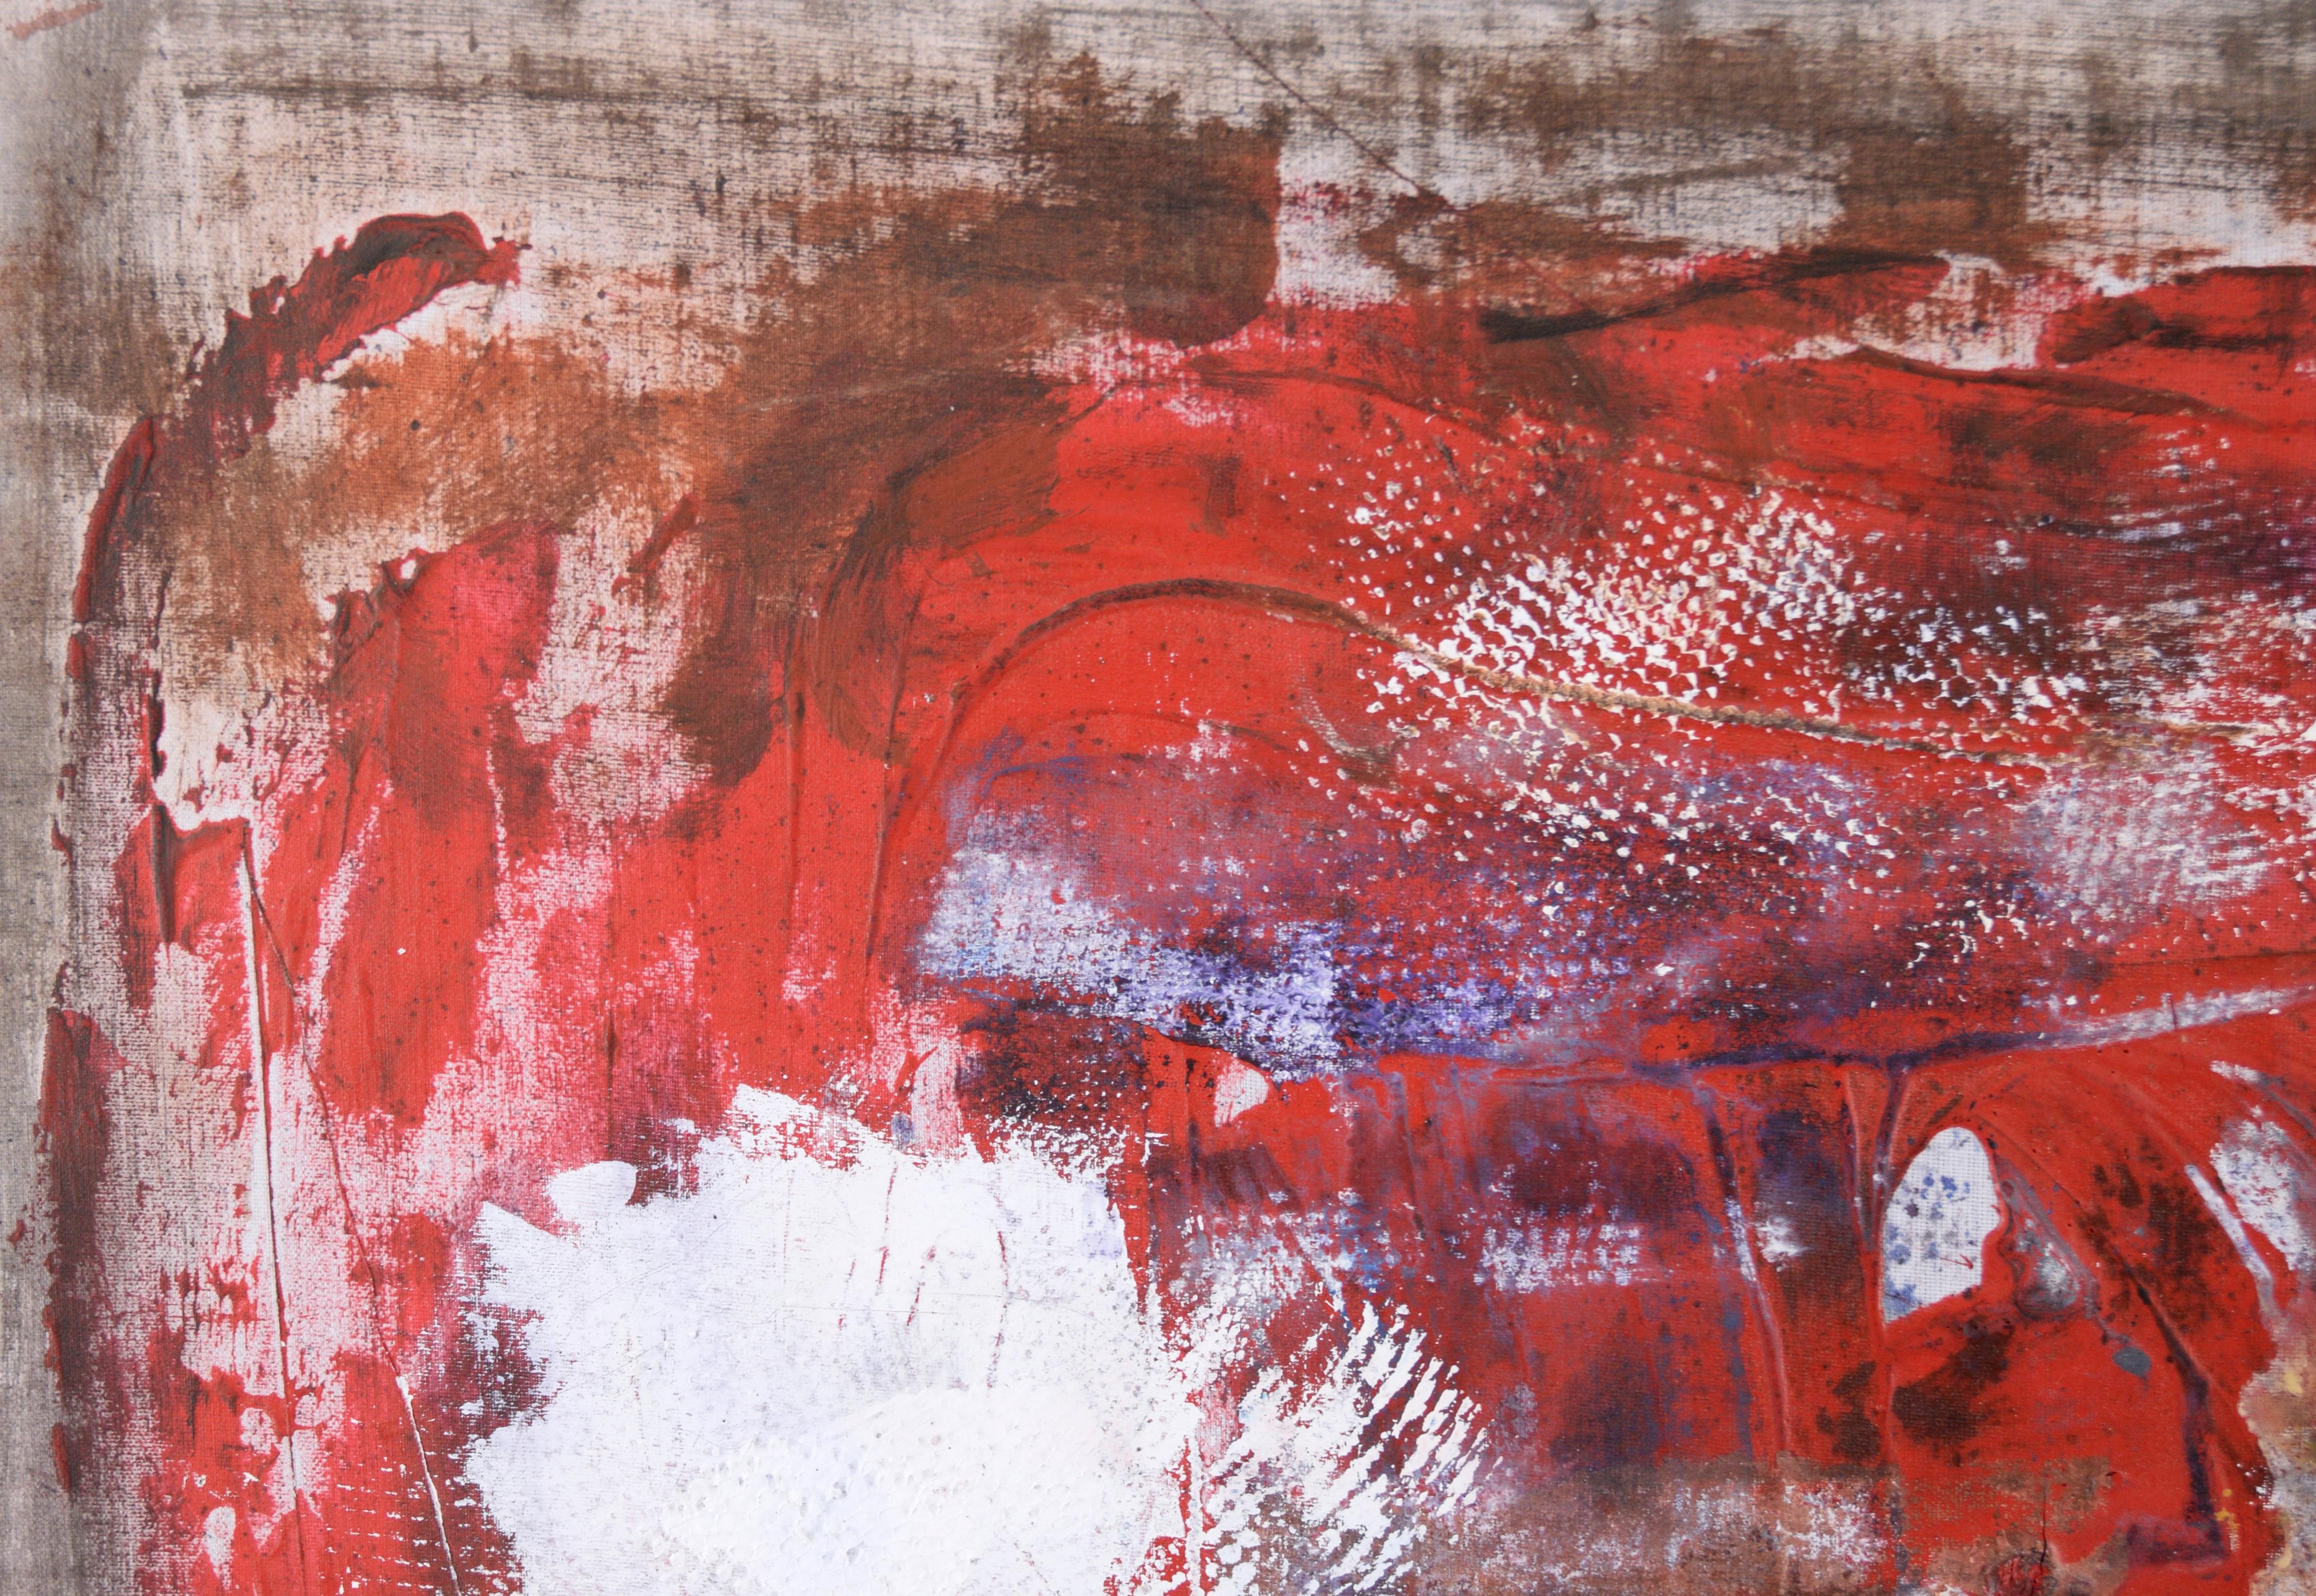 Red Splatters on  Grey Field - Abstract Expressionist in Acrylic on Linen - Painting by D Whalen